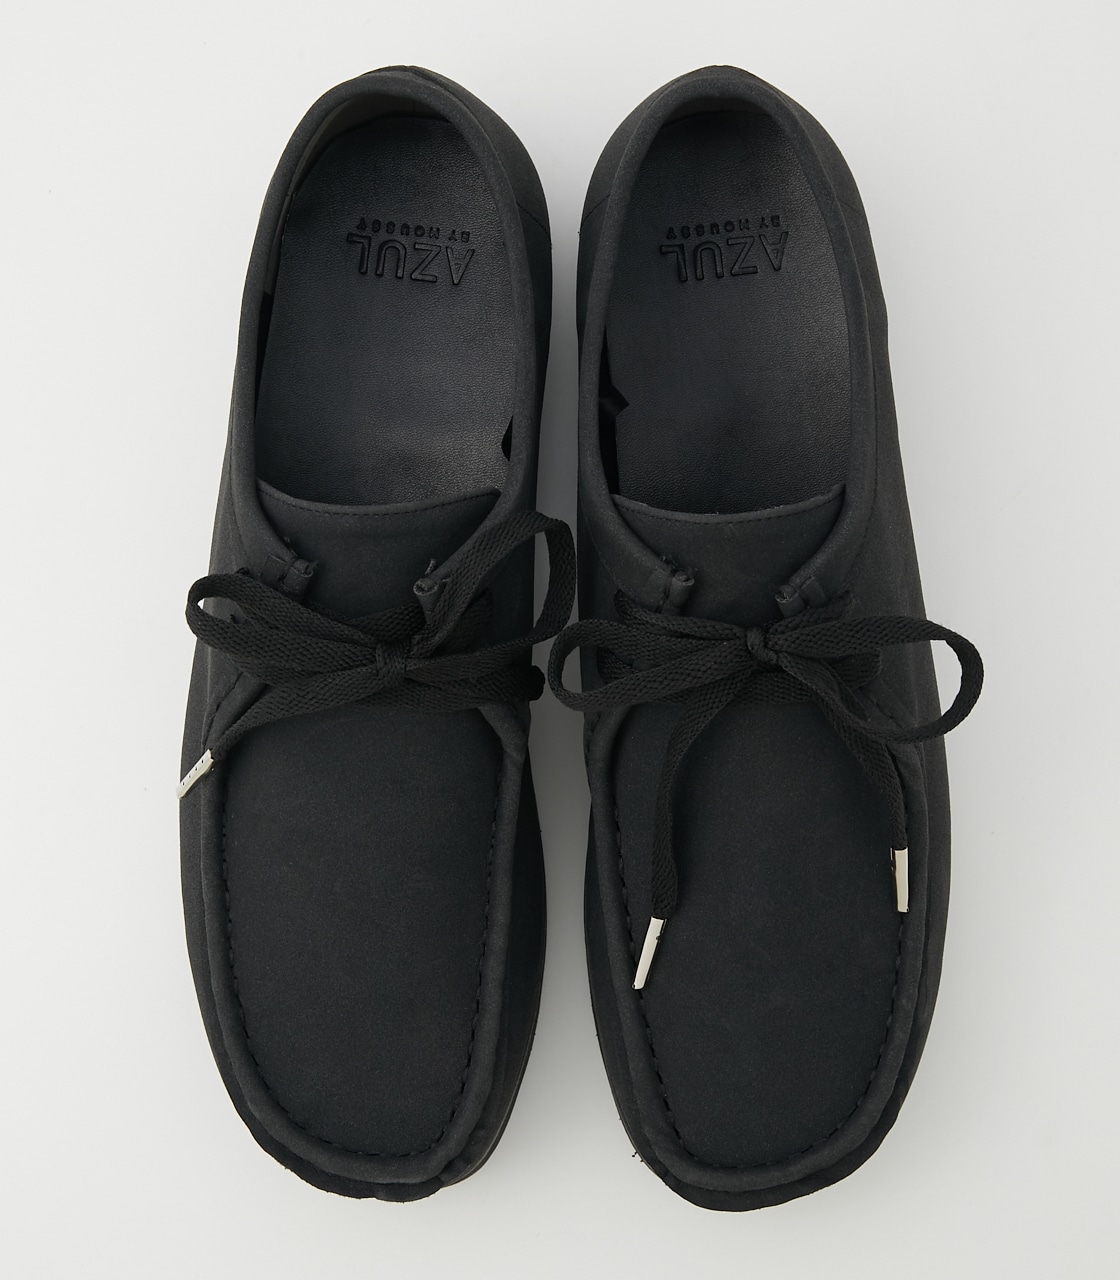 FAUX SUEDE MOCCASIN/フェイクスエードモカシン 詳細画像 BLK 3